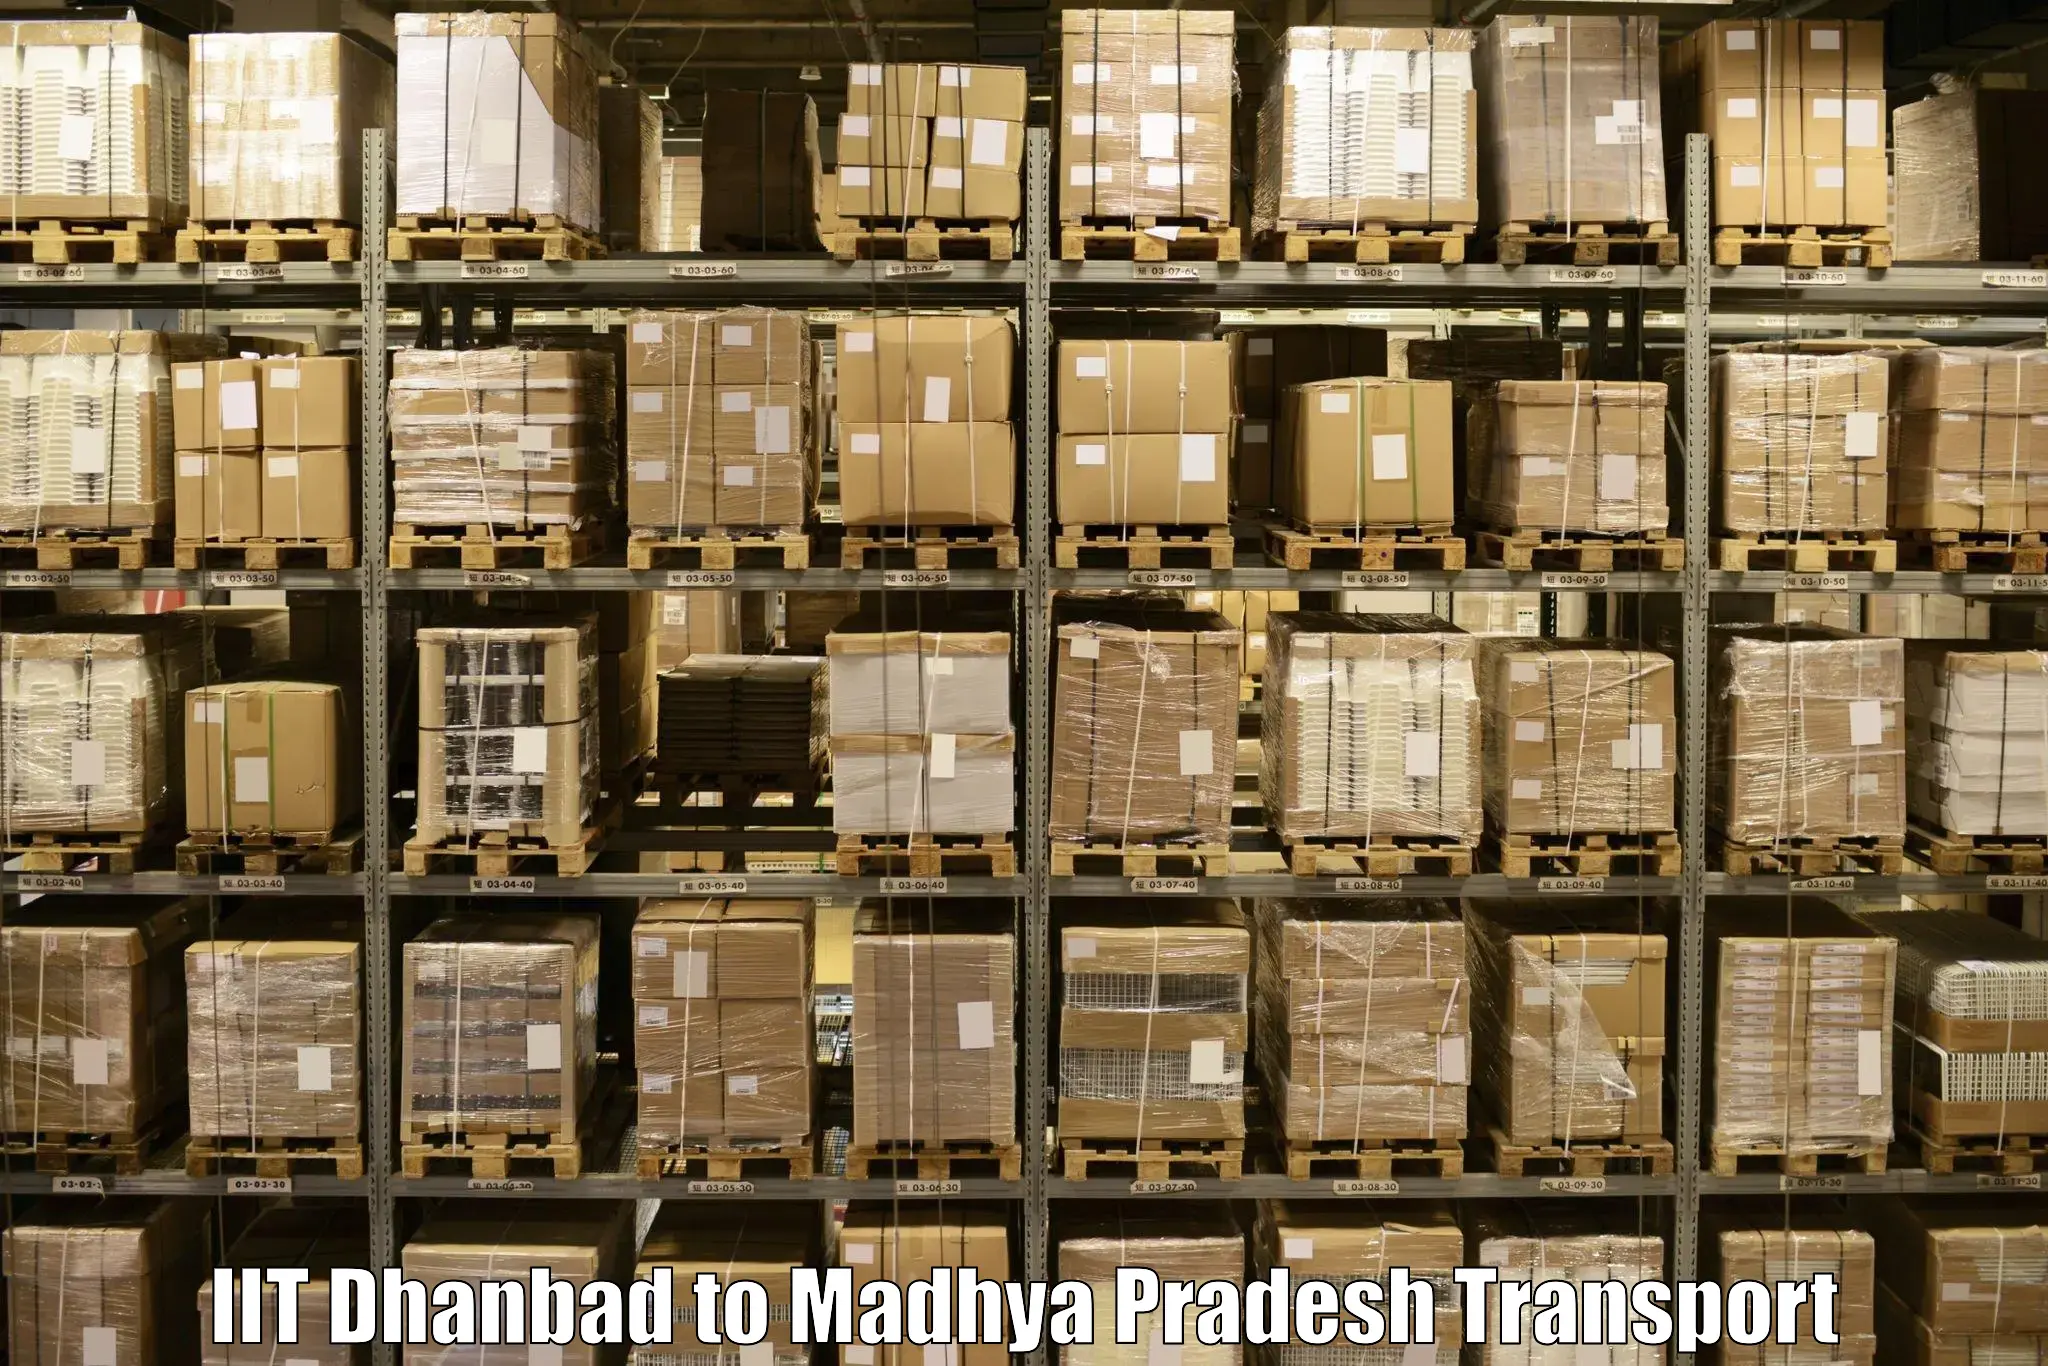 Transportation services IIT Dhanbad to Bhopal